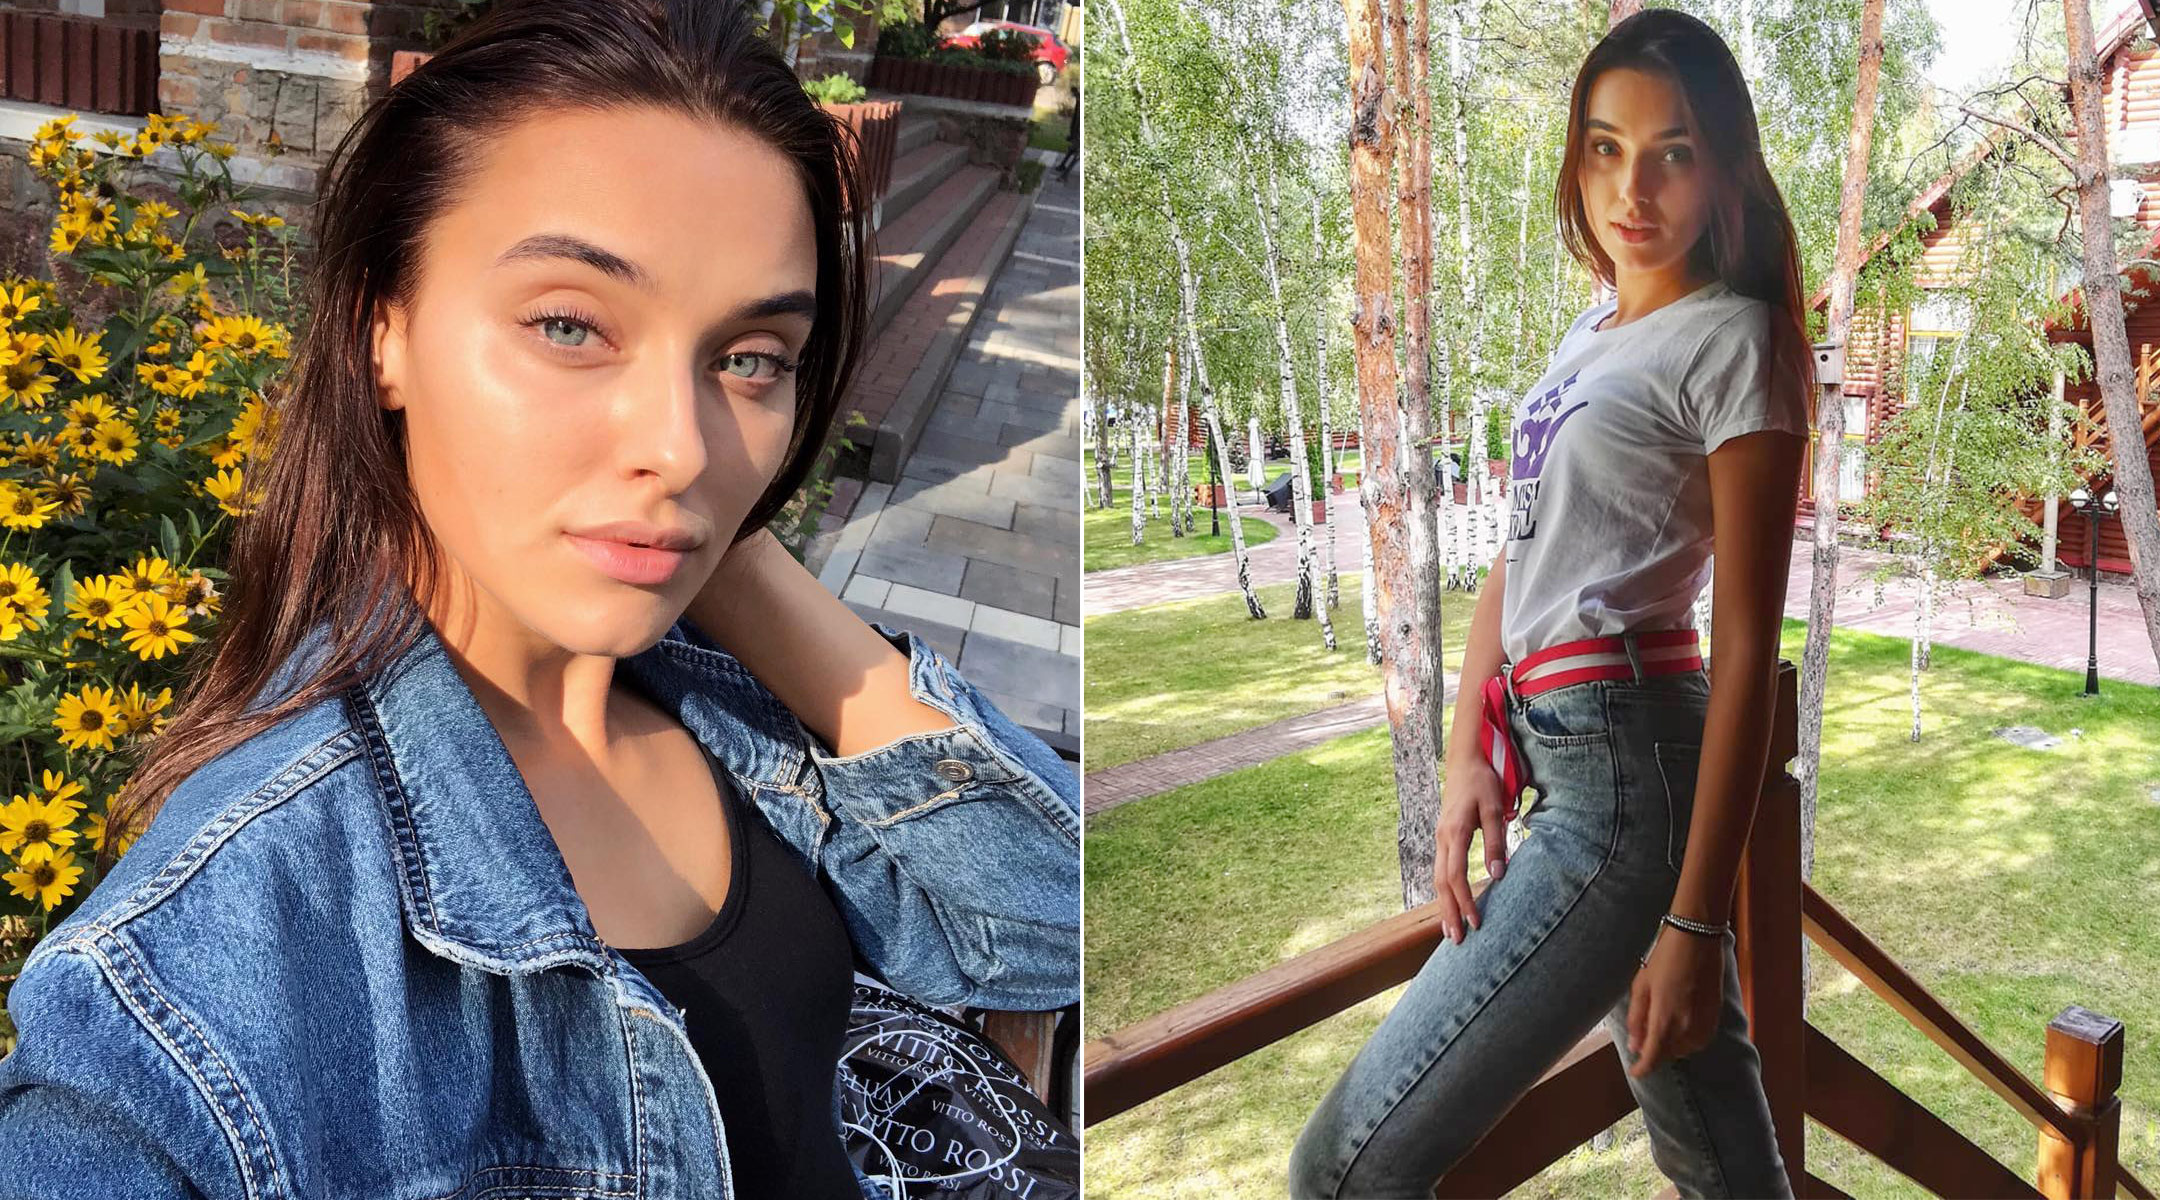 Miss Ukraine, Veronika Didusenko challenges the miss universe rule that you cannot be married or have kids to win the competition.